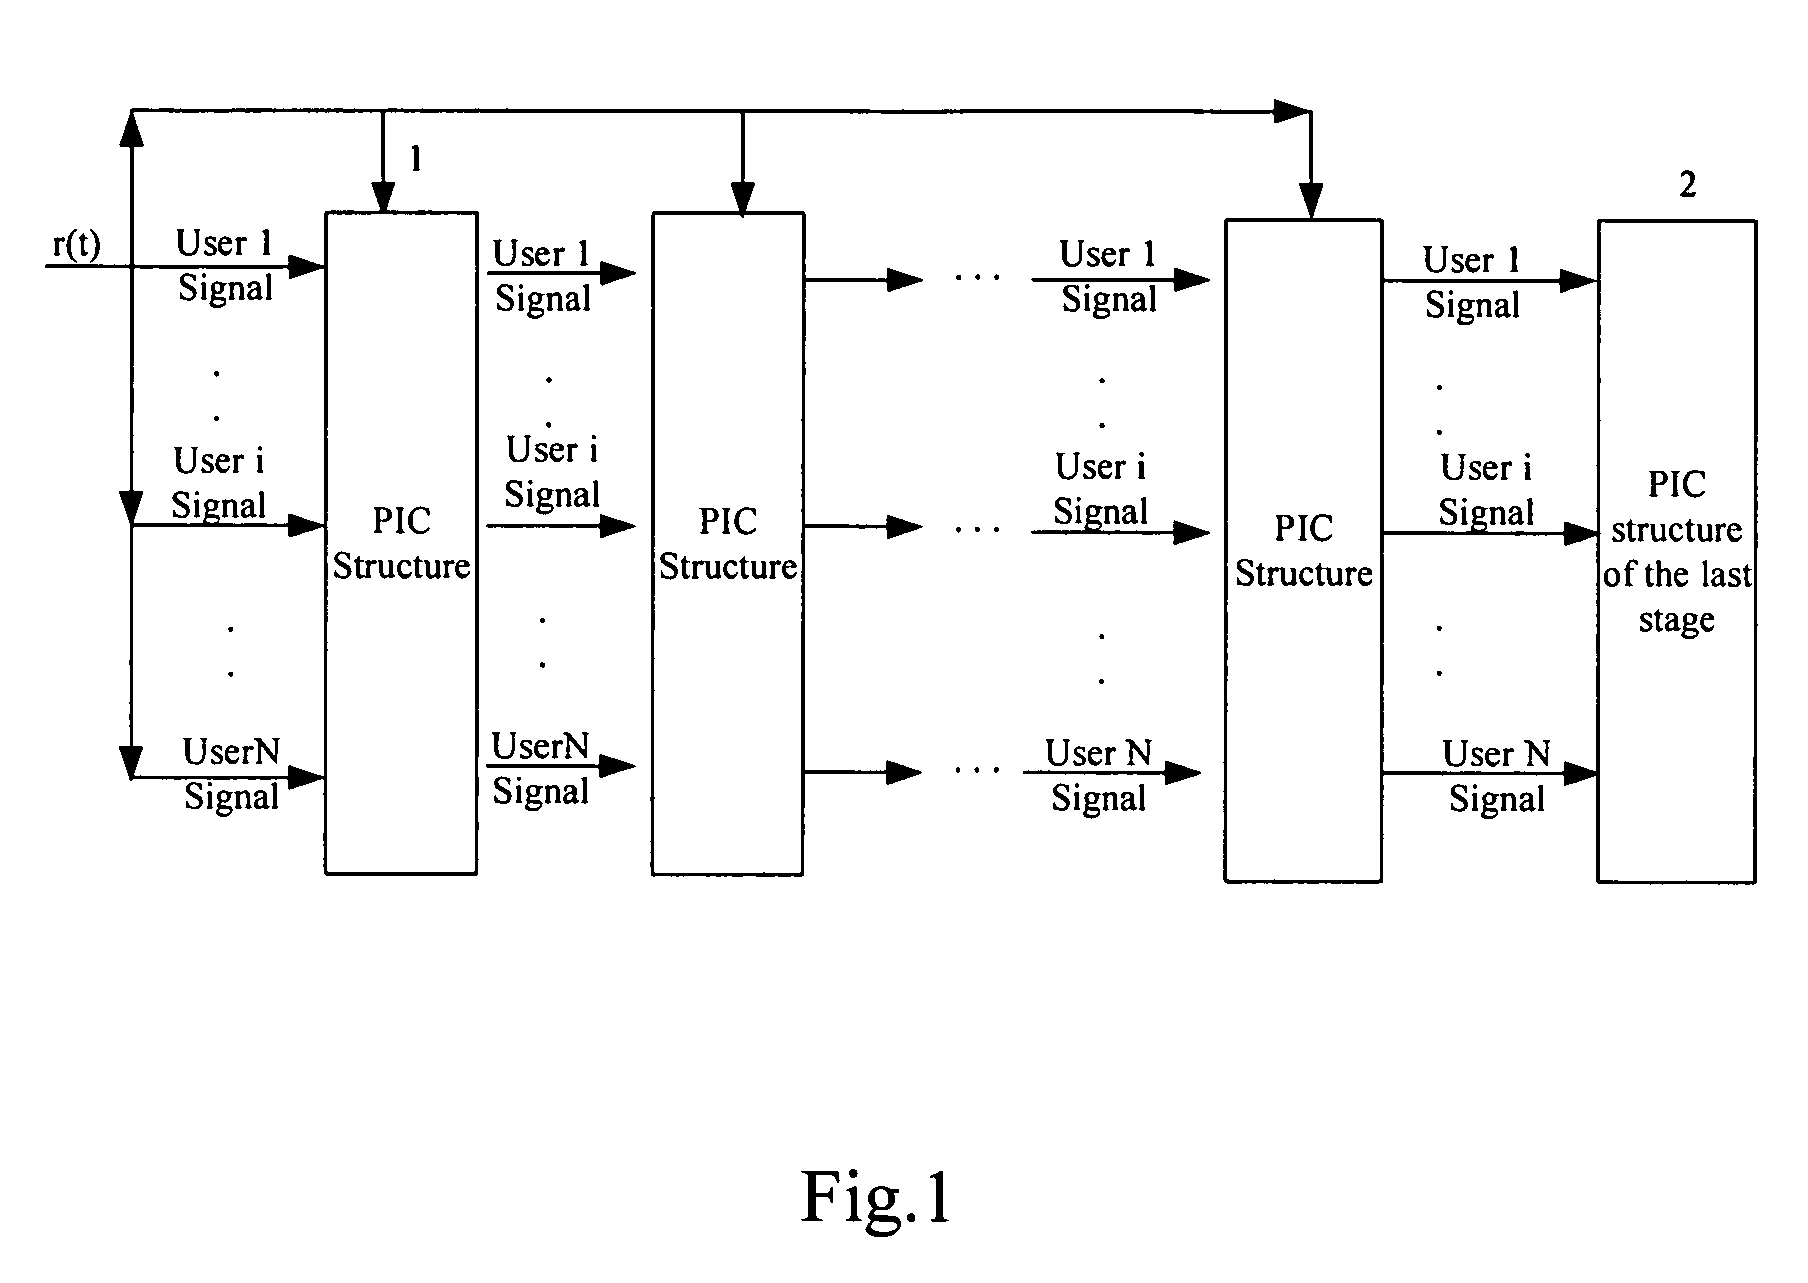 Method of double weighting parallel interference cancellation